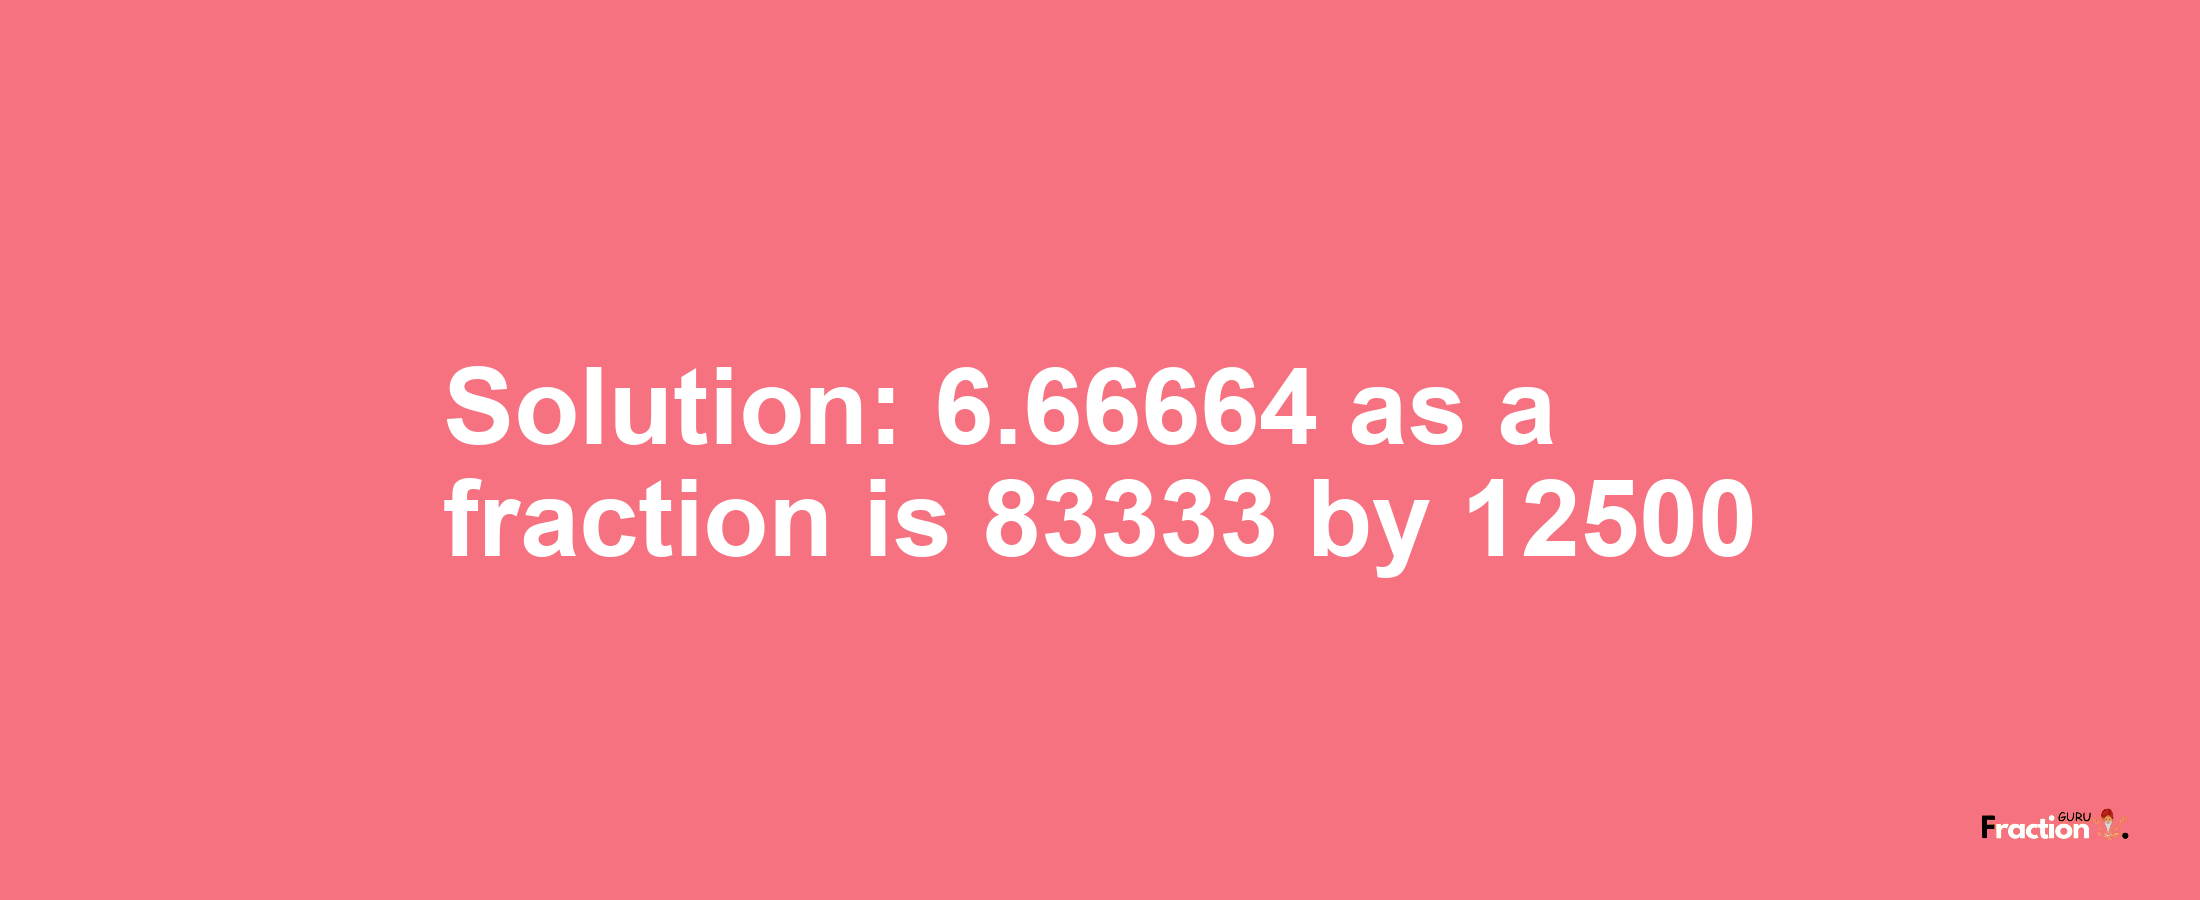 Solution:6.66664 as a fraction is 83333/12500